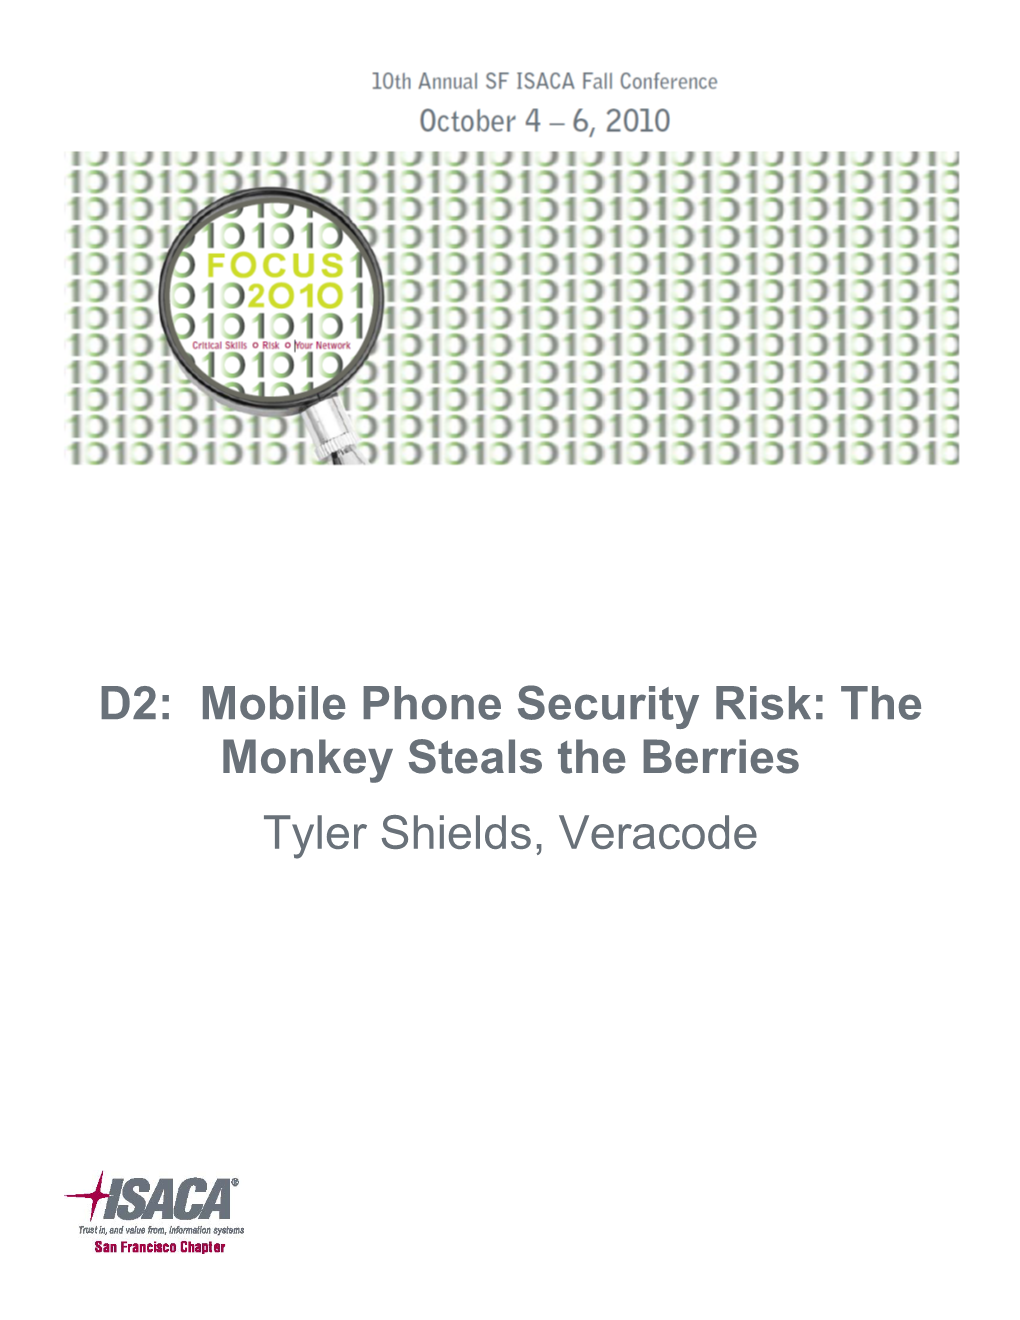 Mobile Phone Security Risk: the Monkey Steals the Berries Tyler Shields, Veracode